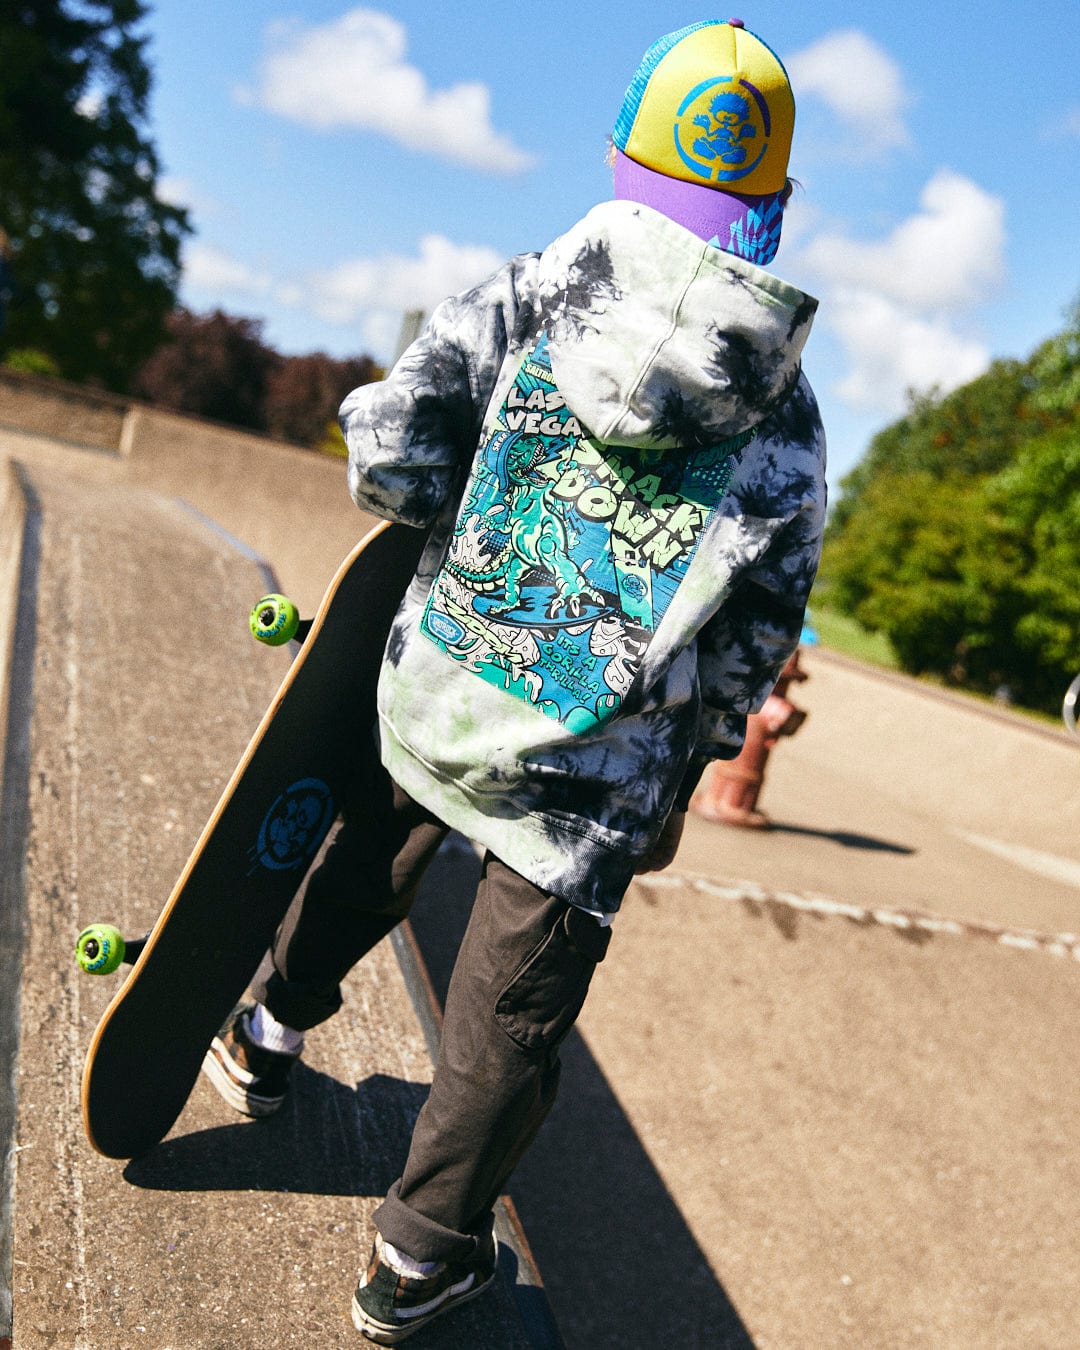 A person dressed in a Saltrock Las Vegas Smackdown - Kids Glow in the Dark Oversized Pop Hoodie - Multi and colorful hat holds a skateboard while standing at a skate park.